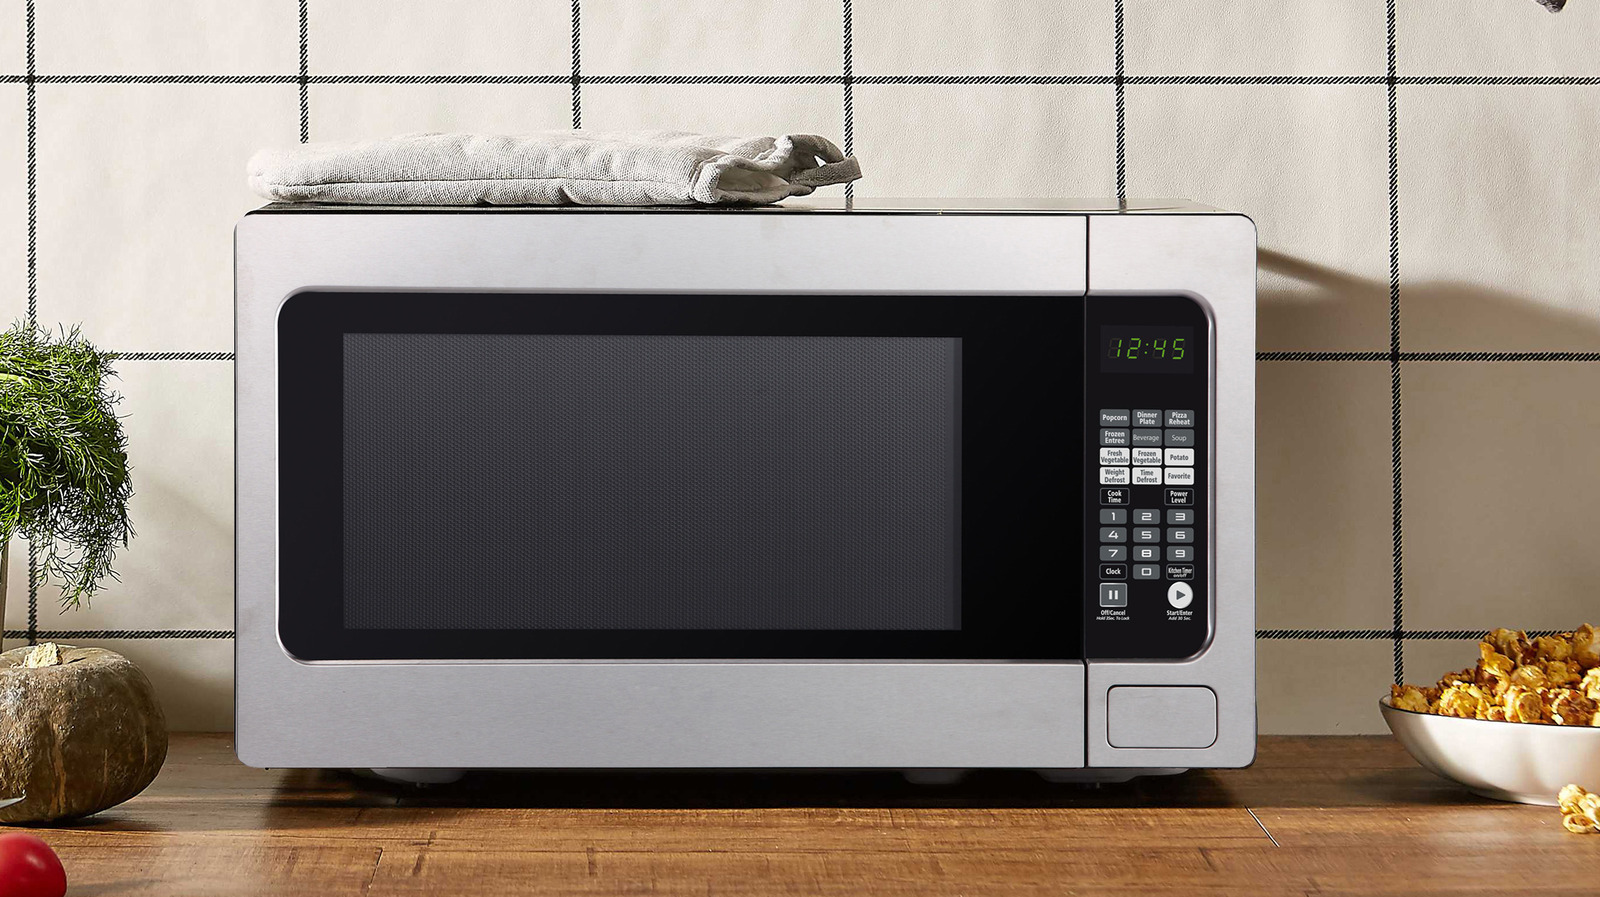 Best Compact Microwaves in 2022 - Reviews